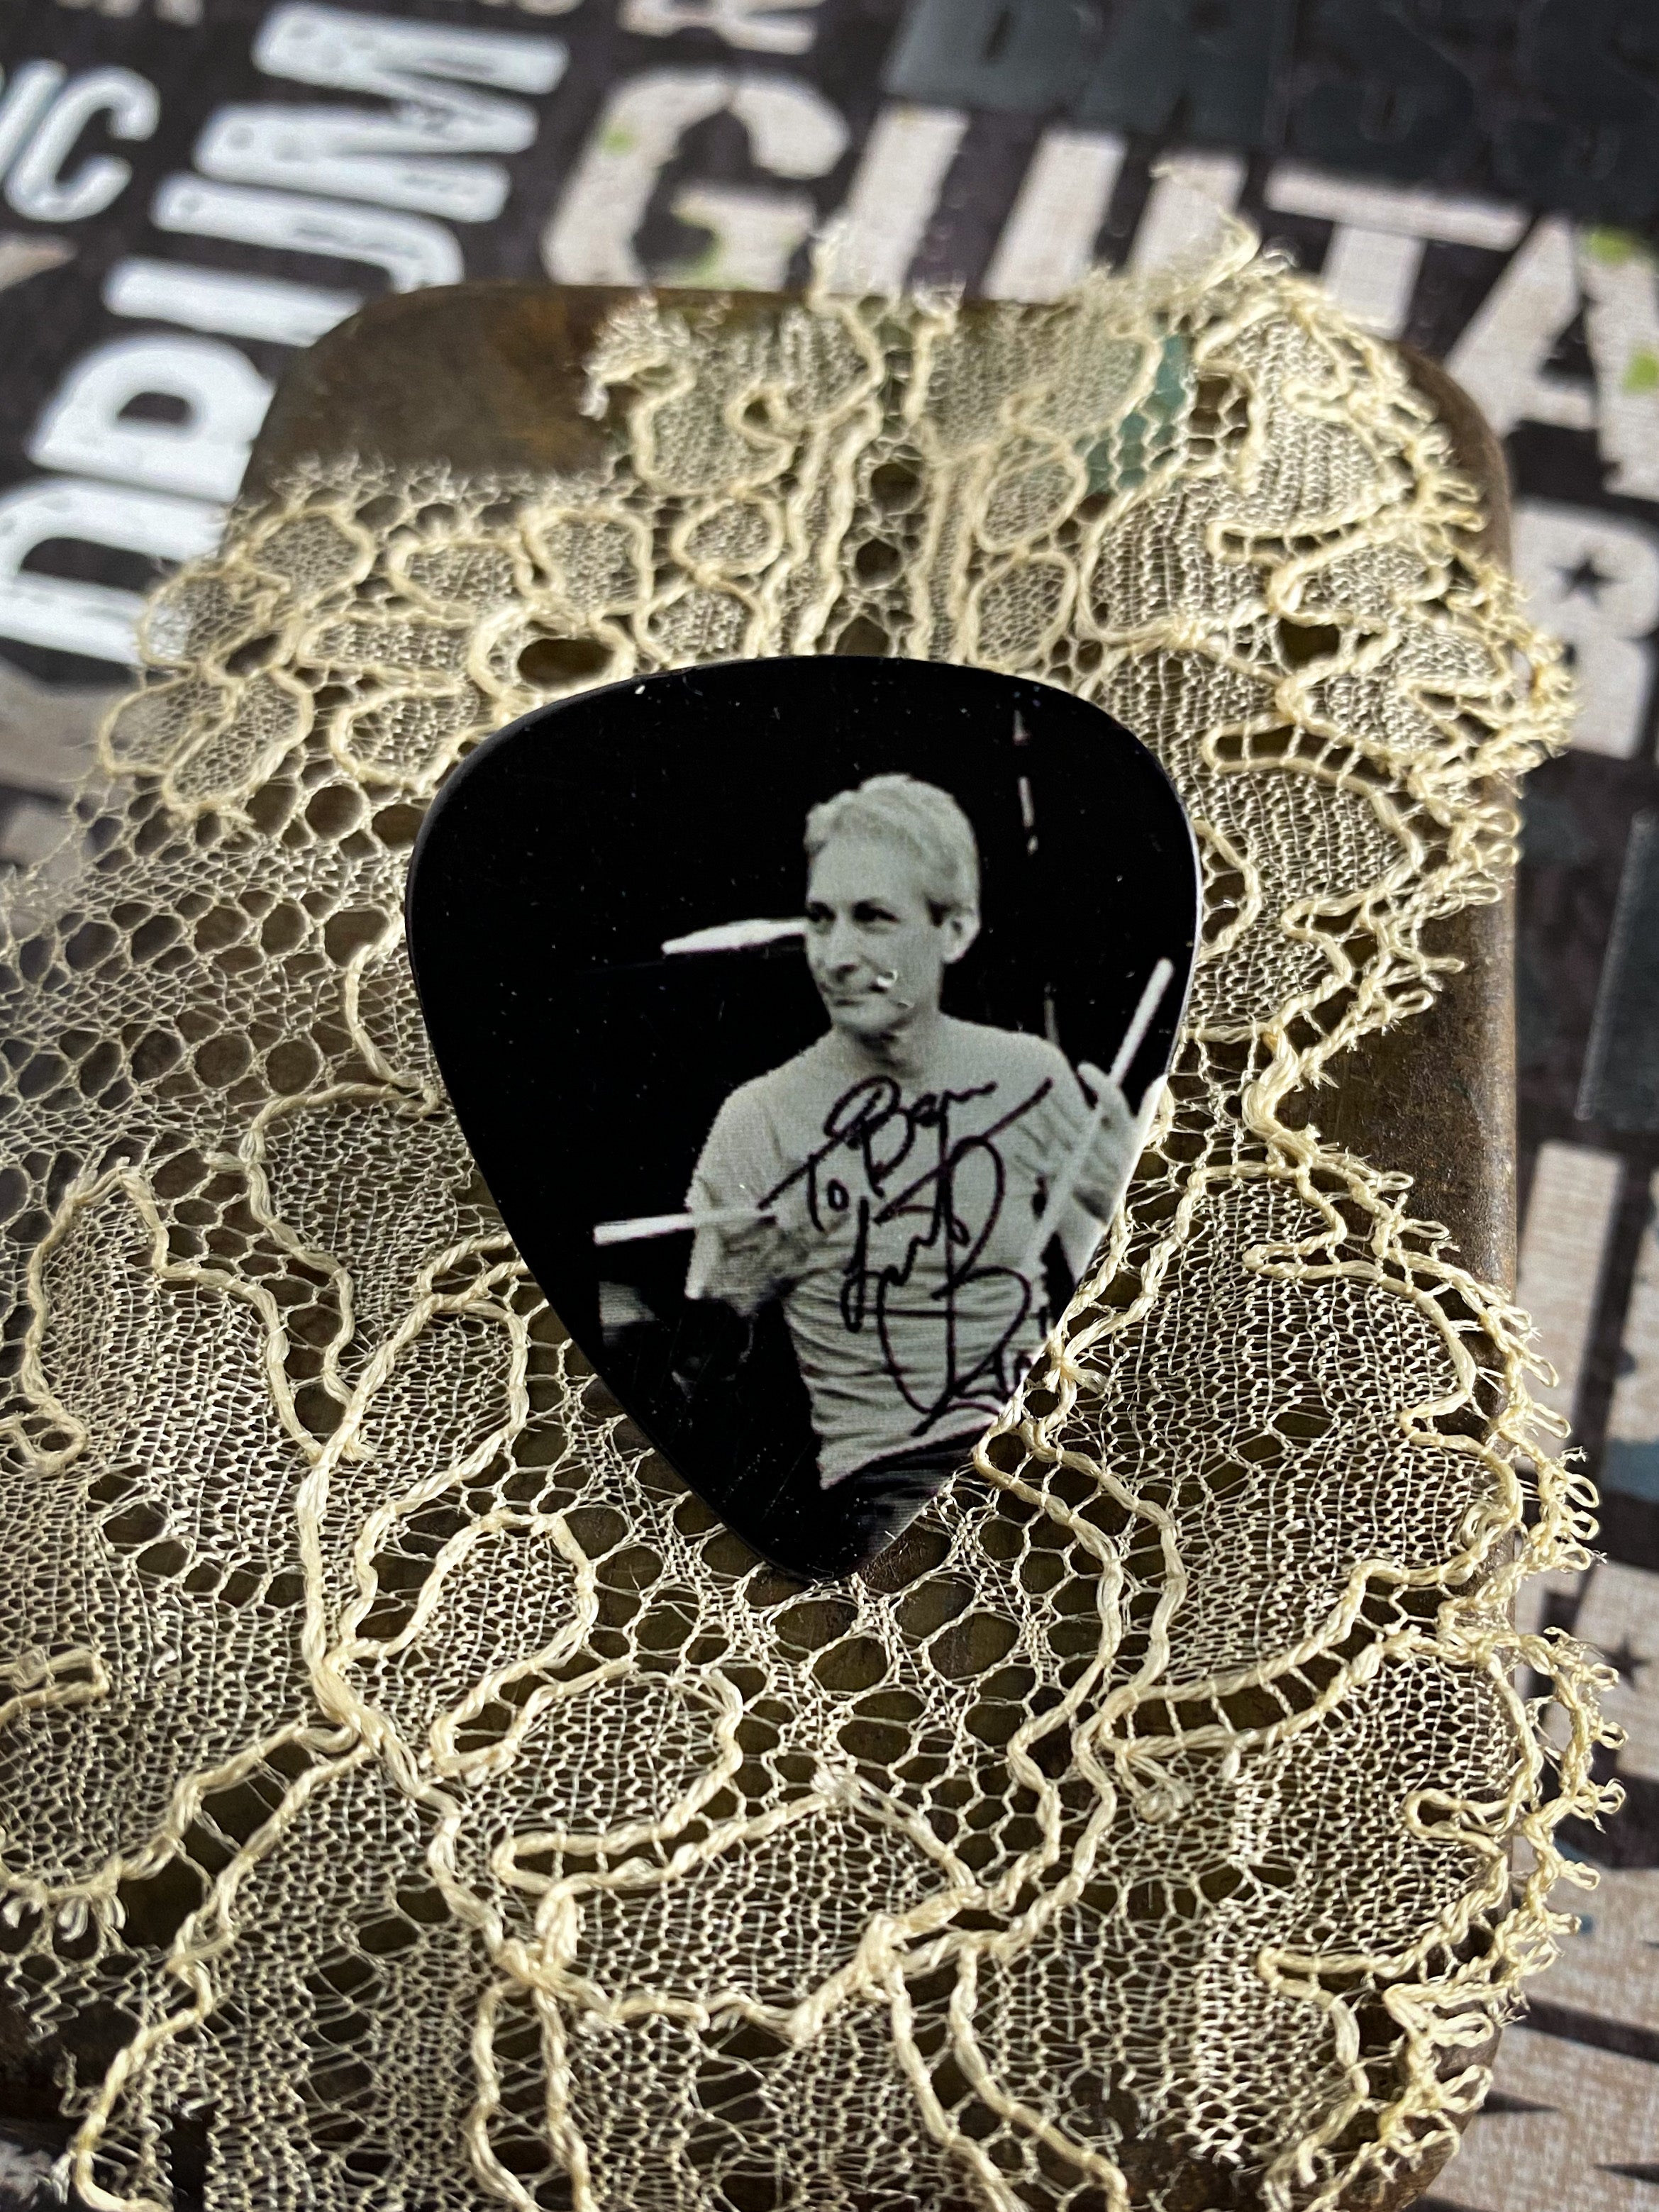 Guitar Pick Pin - Charlie Watts of the Rolling Stones